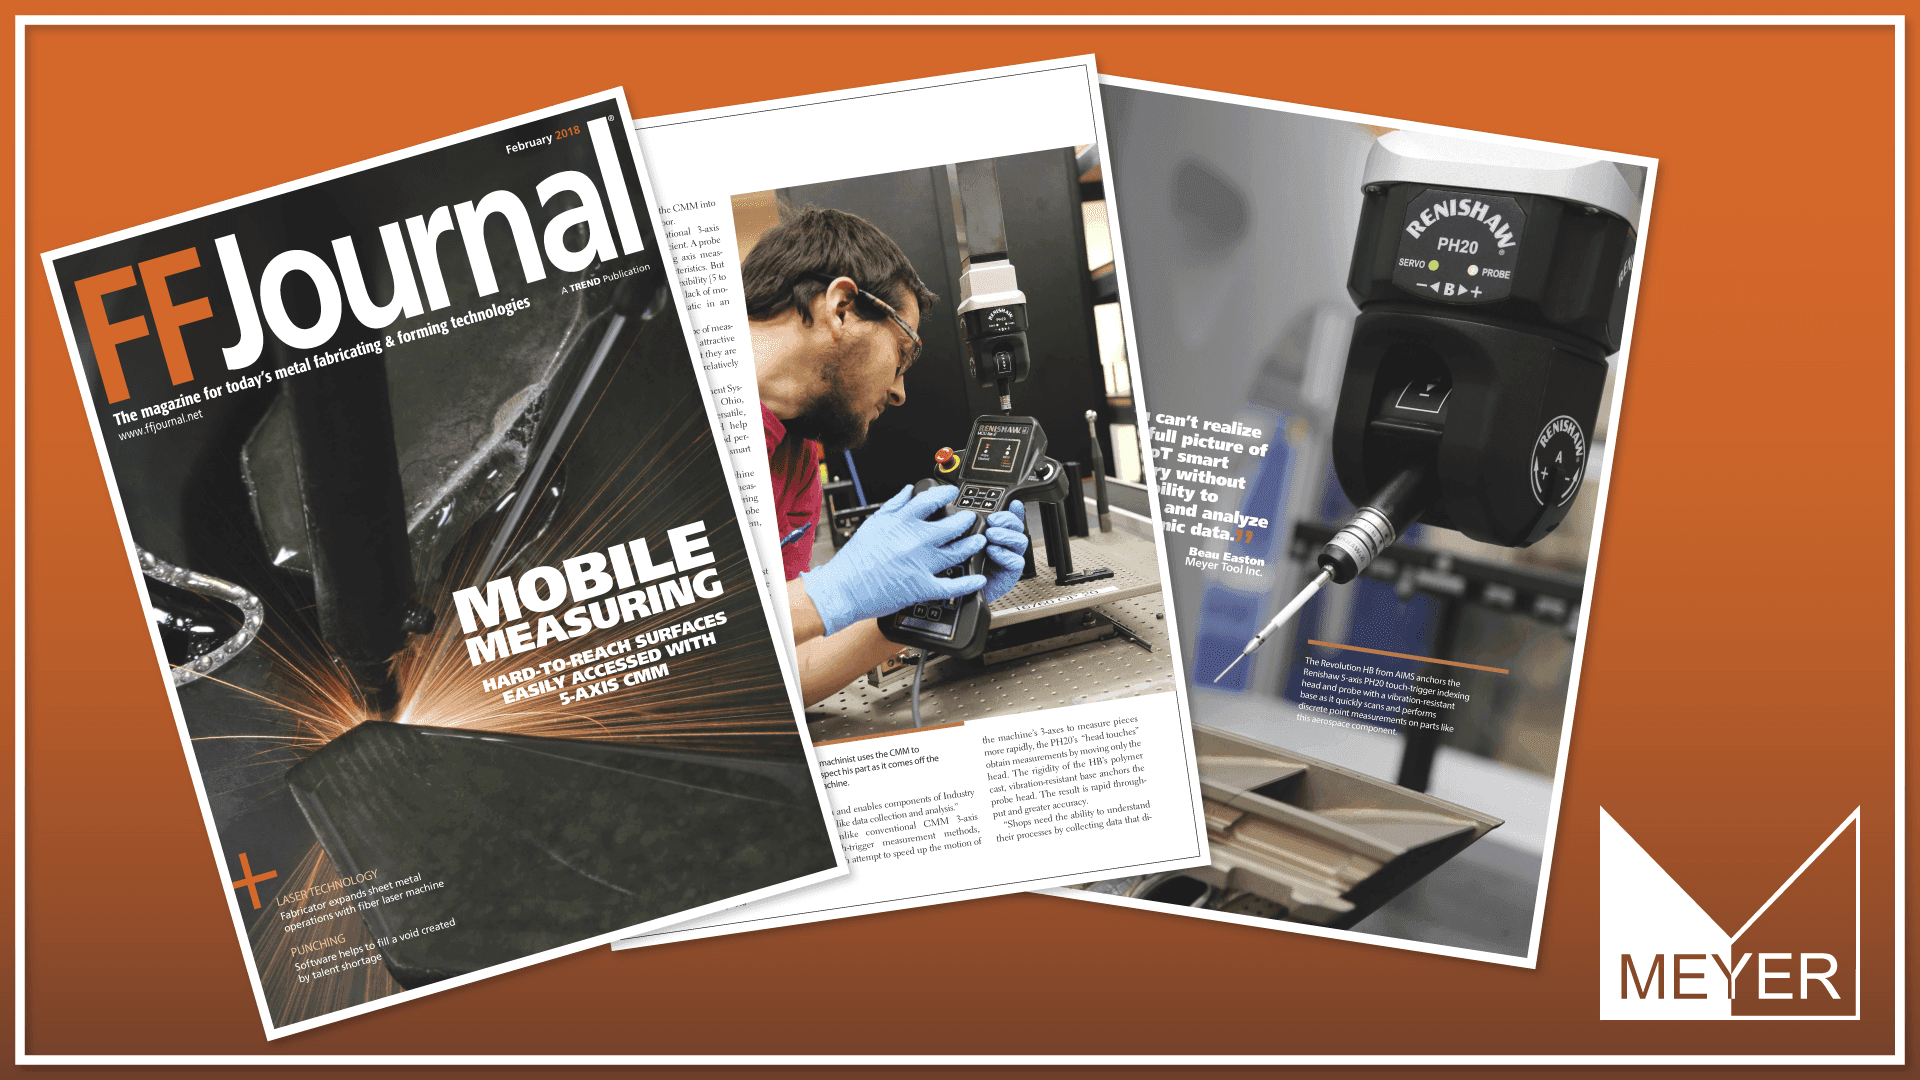 Product:  Meyer Tool | Meyer Tool featured in FFJournal - Meyer Tool